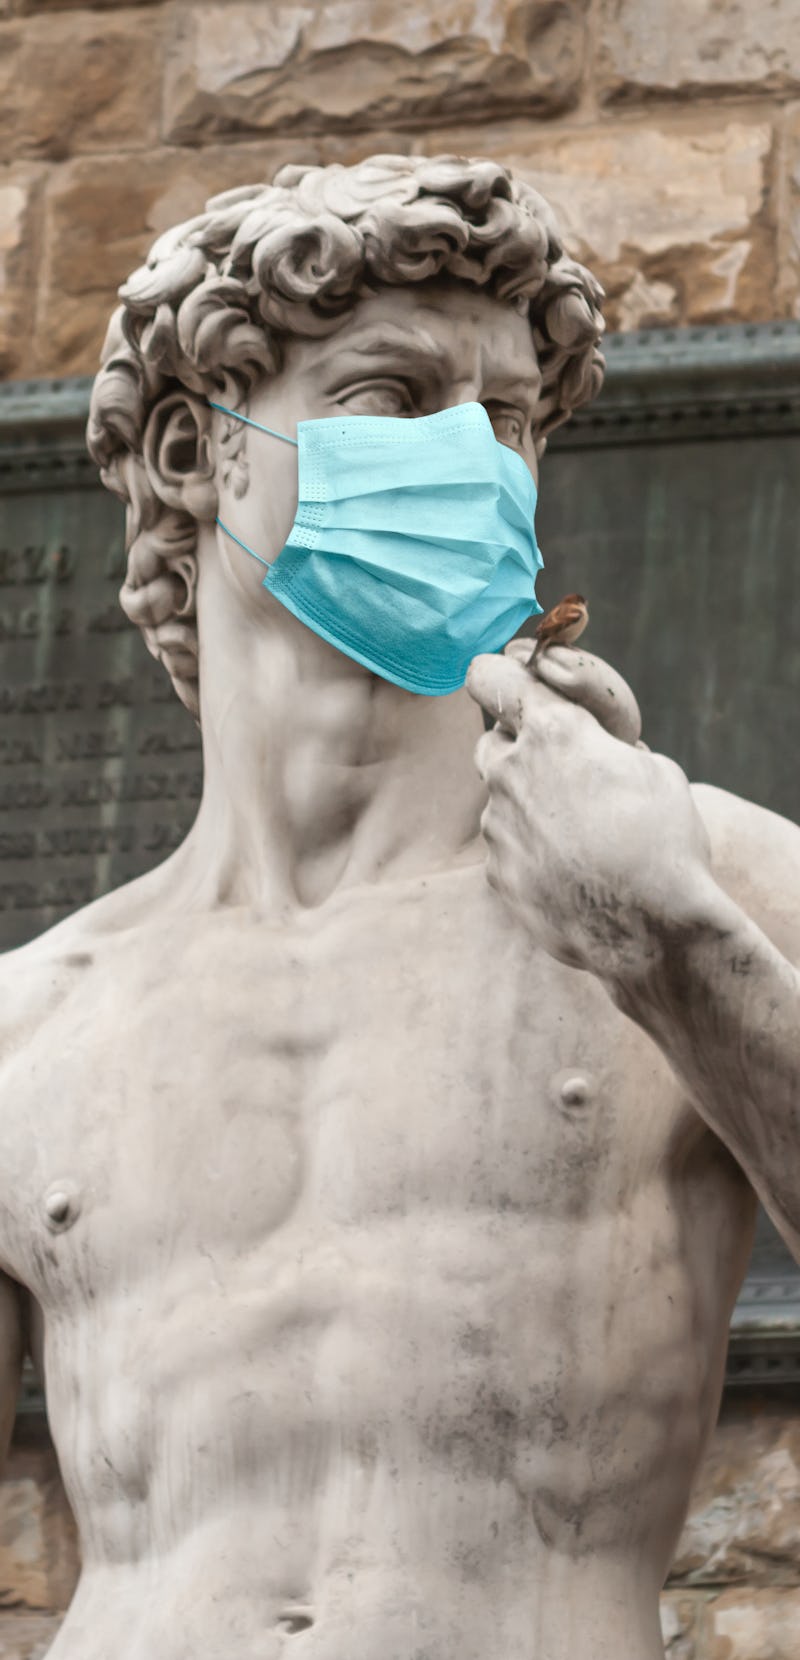 The Statue Of David in the Piazza della Signoria In Italy Wearing Blue Protective Medical Face Mask.